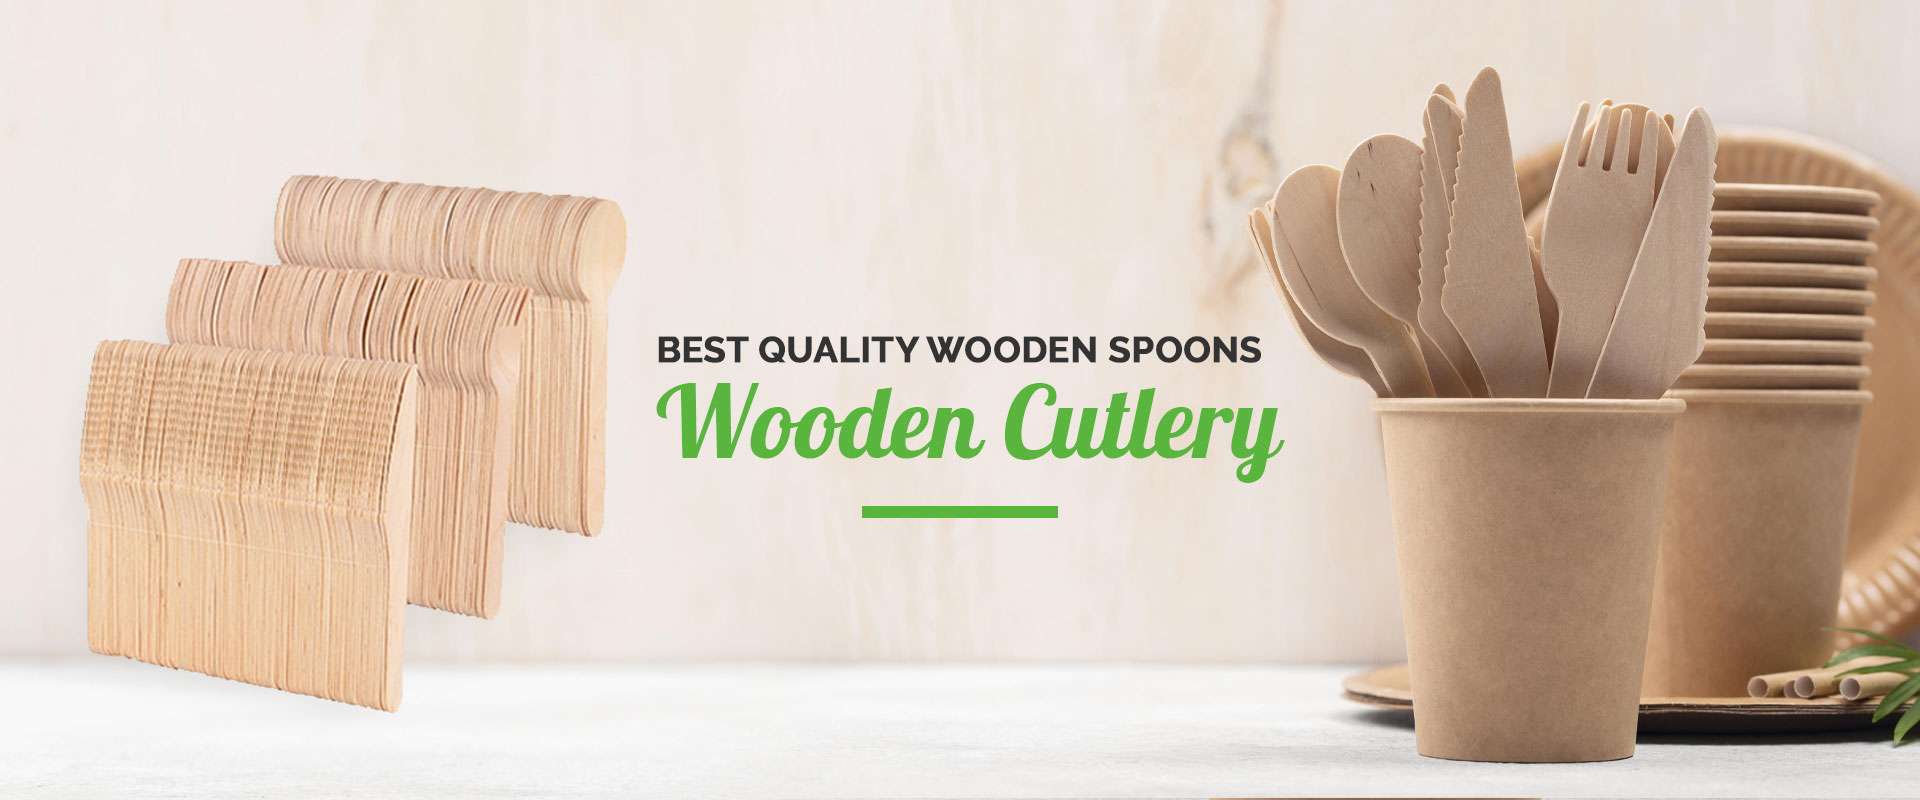  Wooden Cutlery Manufacturers in Punjab